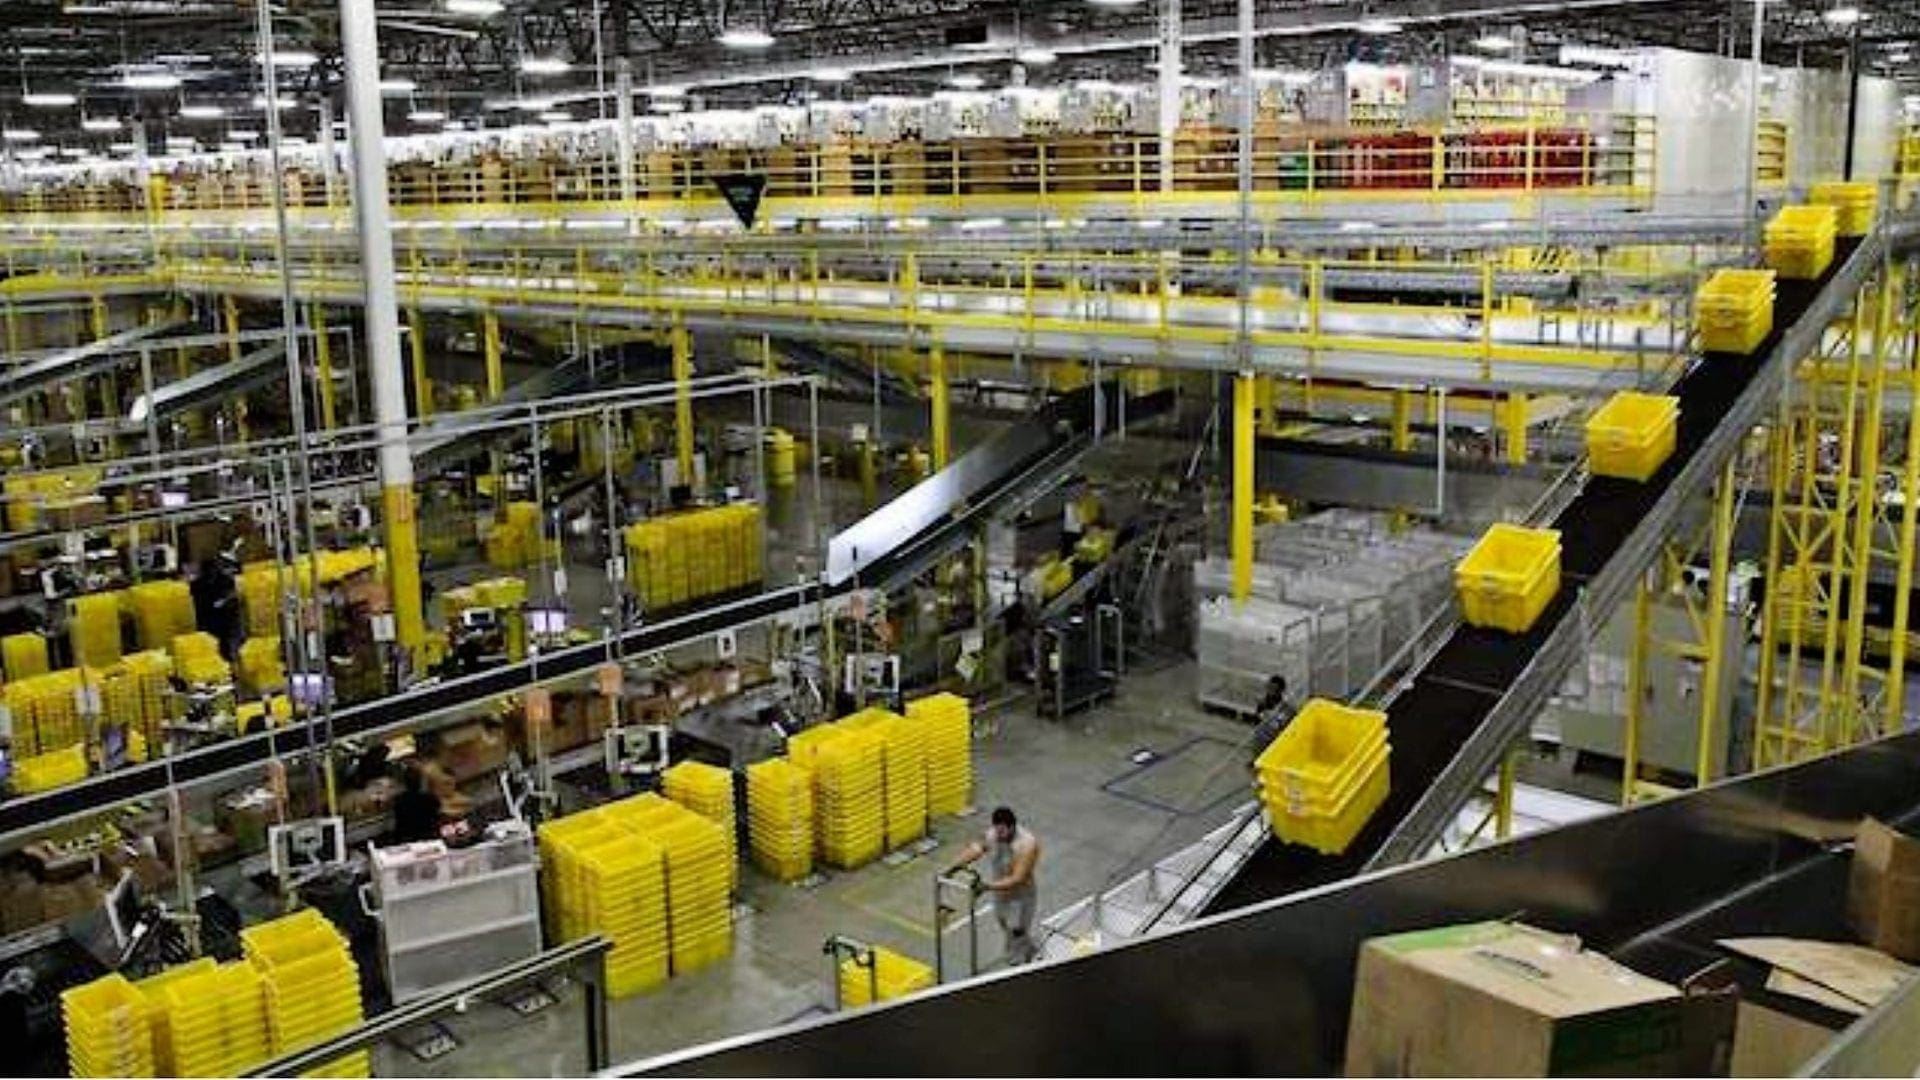 Amazon to Build Multistory Distribution Centers Across the U.S. Knipp